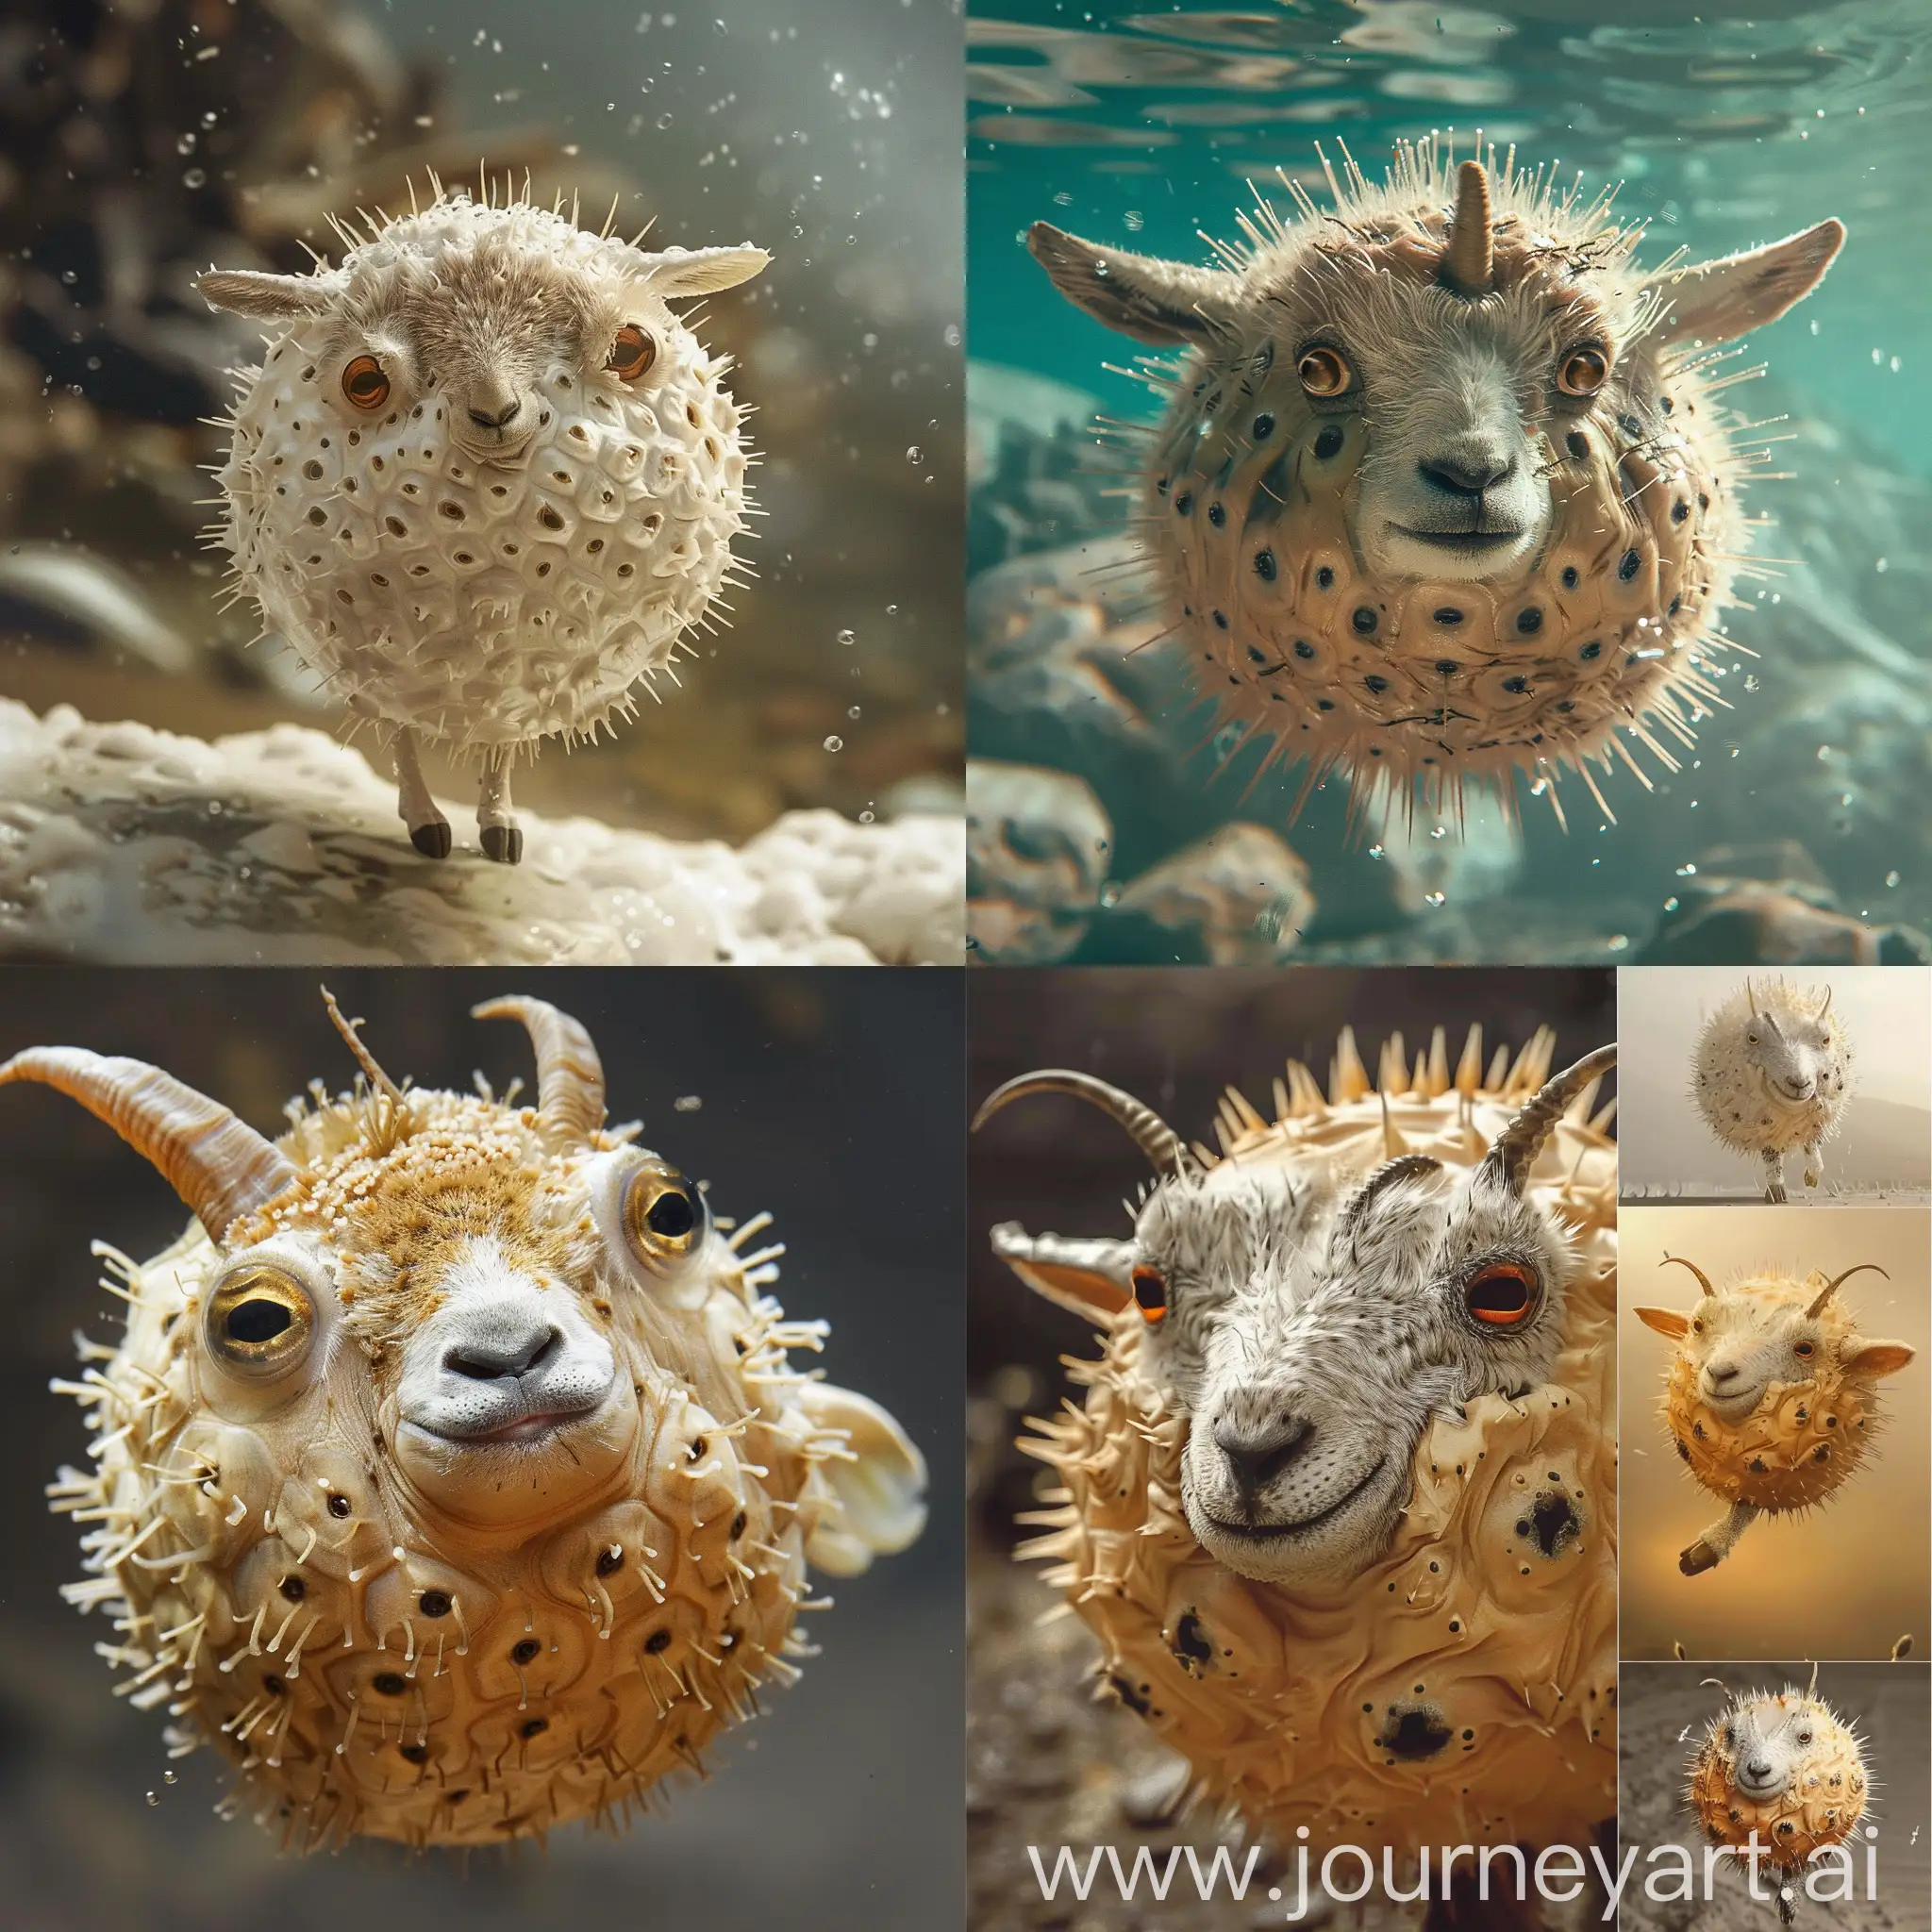 a fusion between a pufferfish and a goat